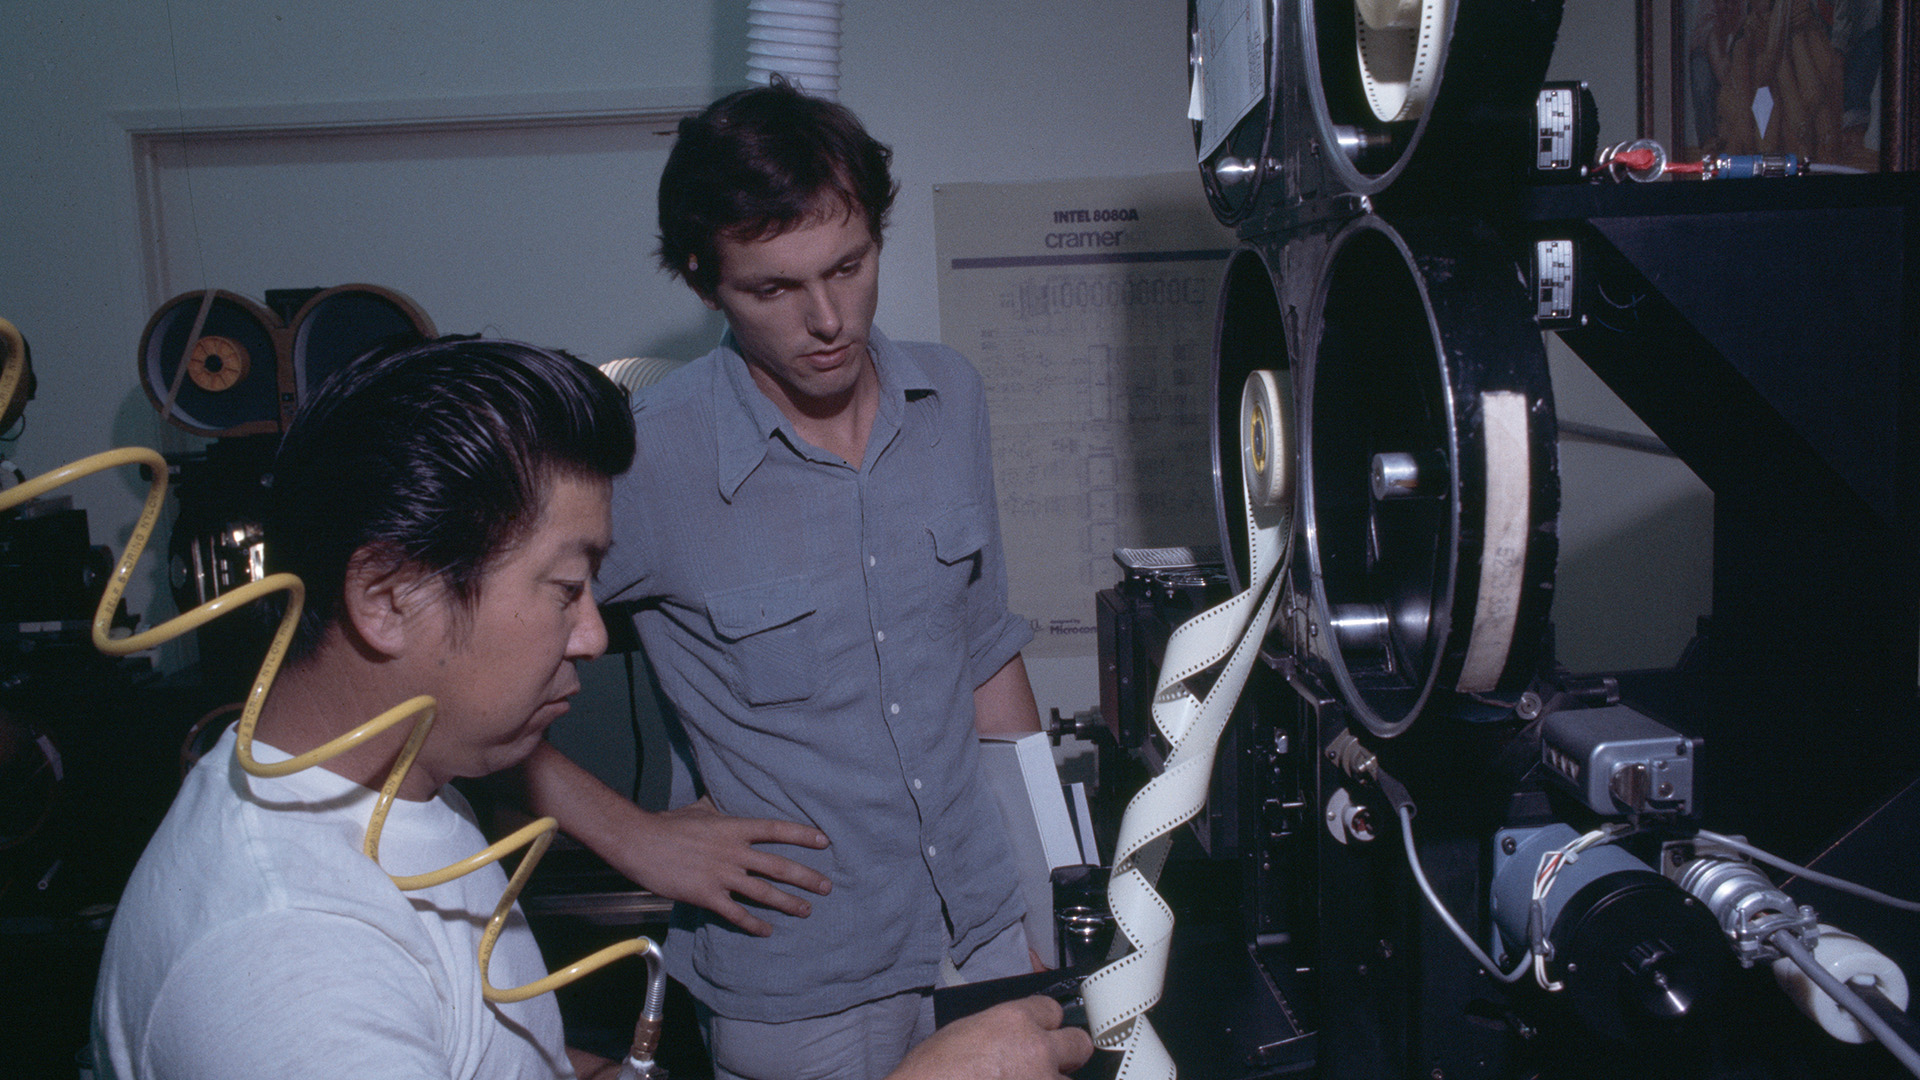 Robert Blalack and colleague at work on Star Wars